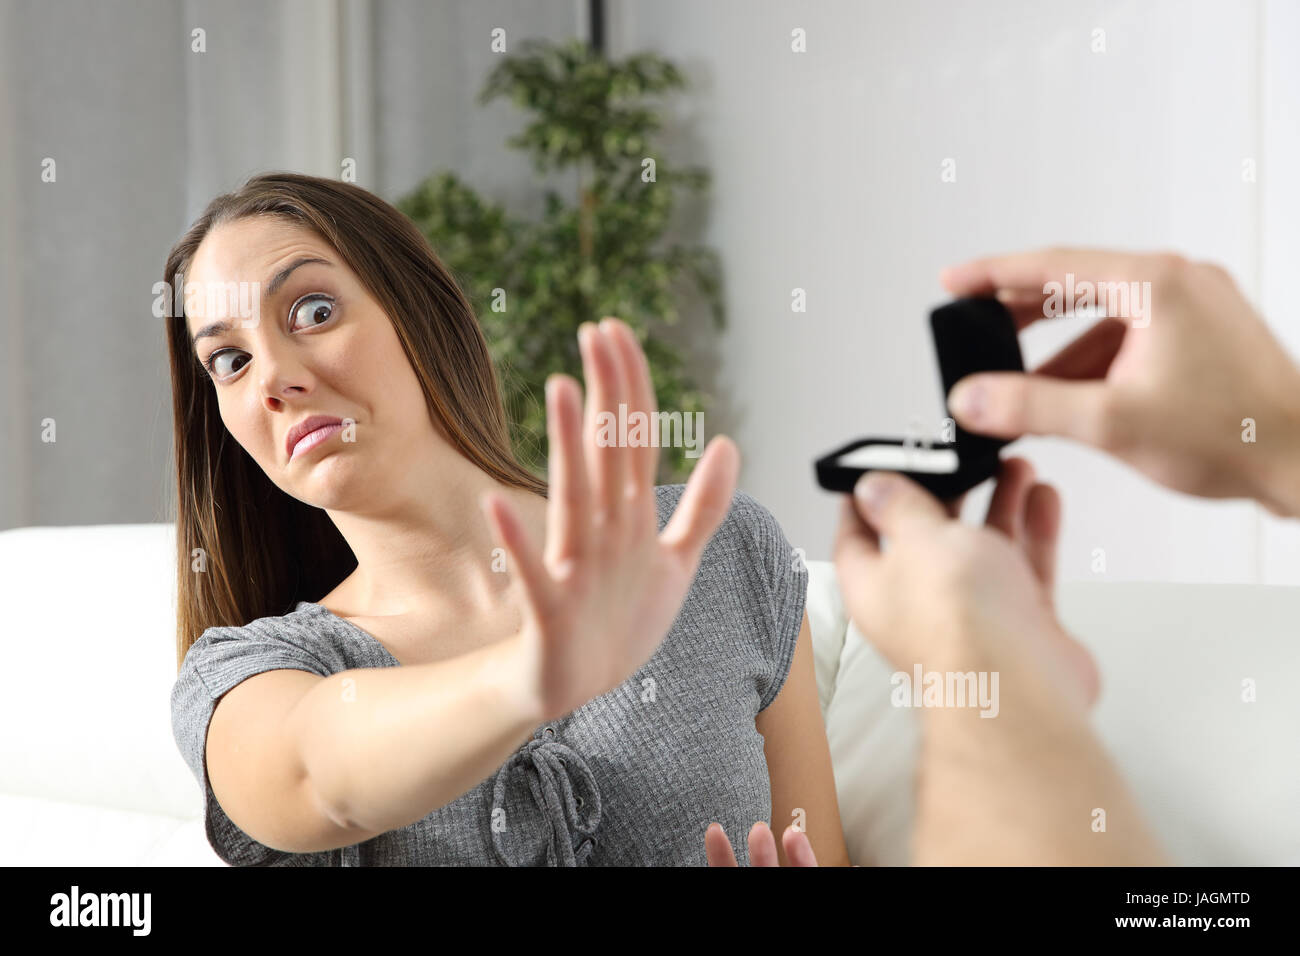 Scared girlfriend rejecting a marriage proposal at home. Humorous situation Stock Photo